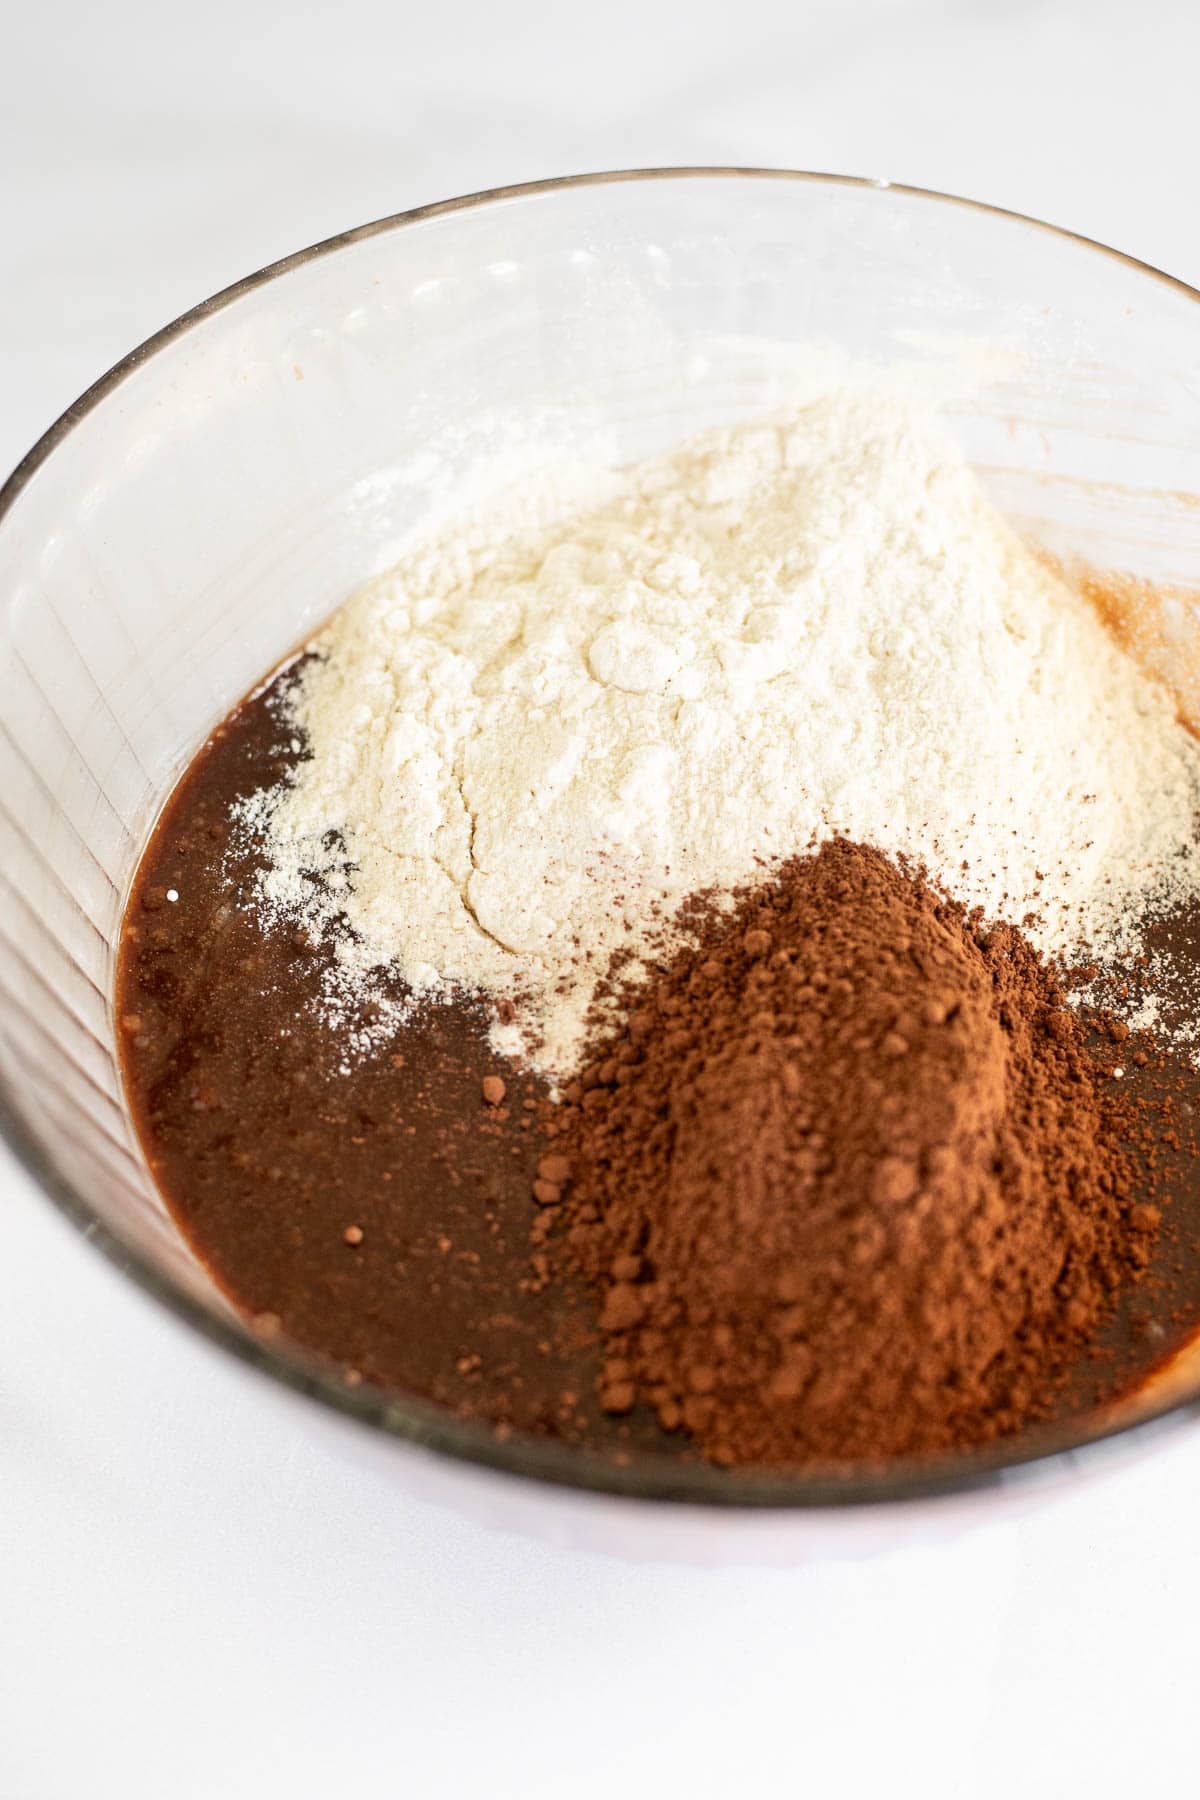 flour and cocoa powder in a glass bowl with melted chocolate.